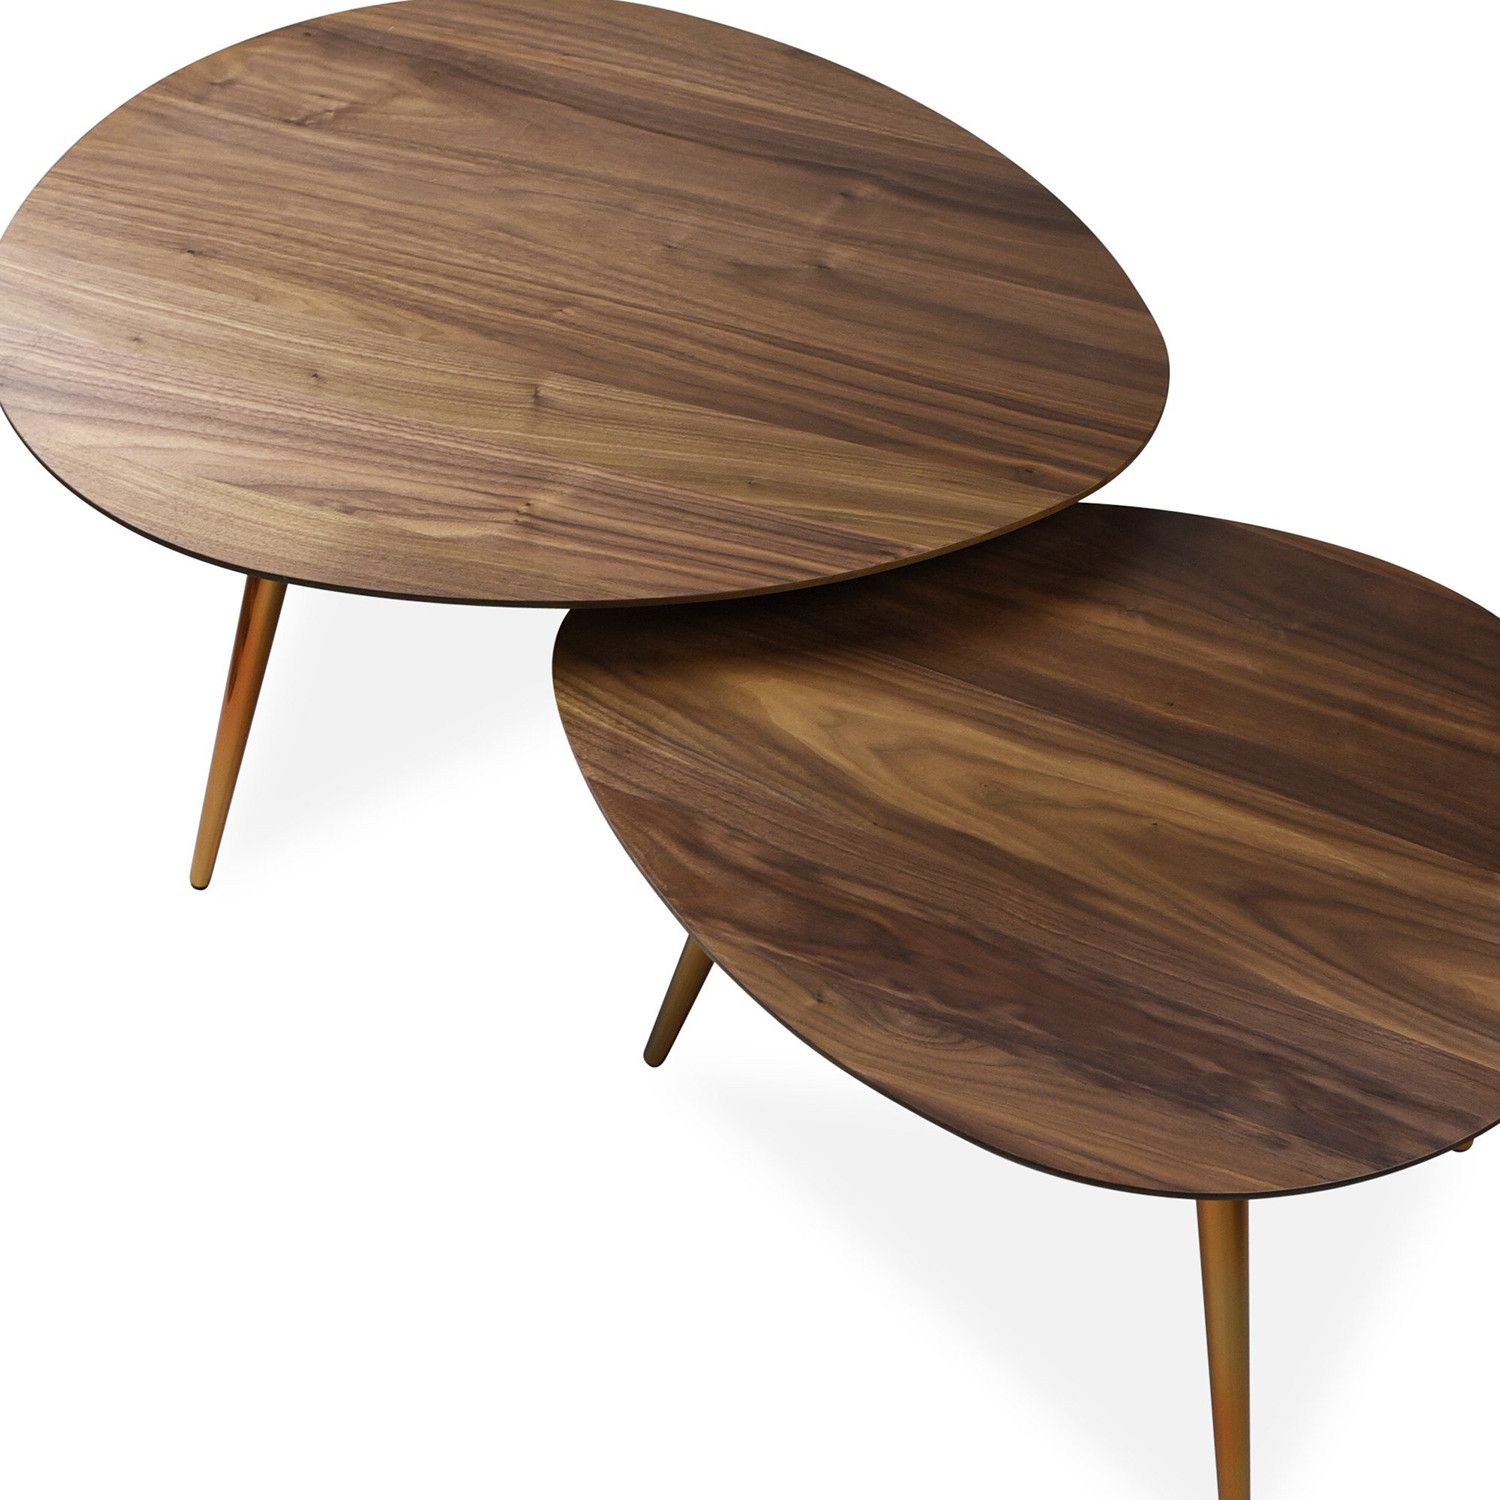 Maddox Mid Century Modern Nesting Coffee Table Set – Edloe Finch Pertaining To Wooden Mid Century Coffee Tables (View 12 of 20)